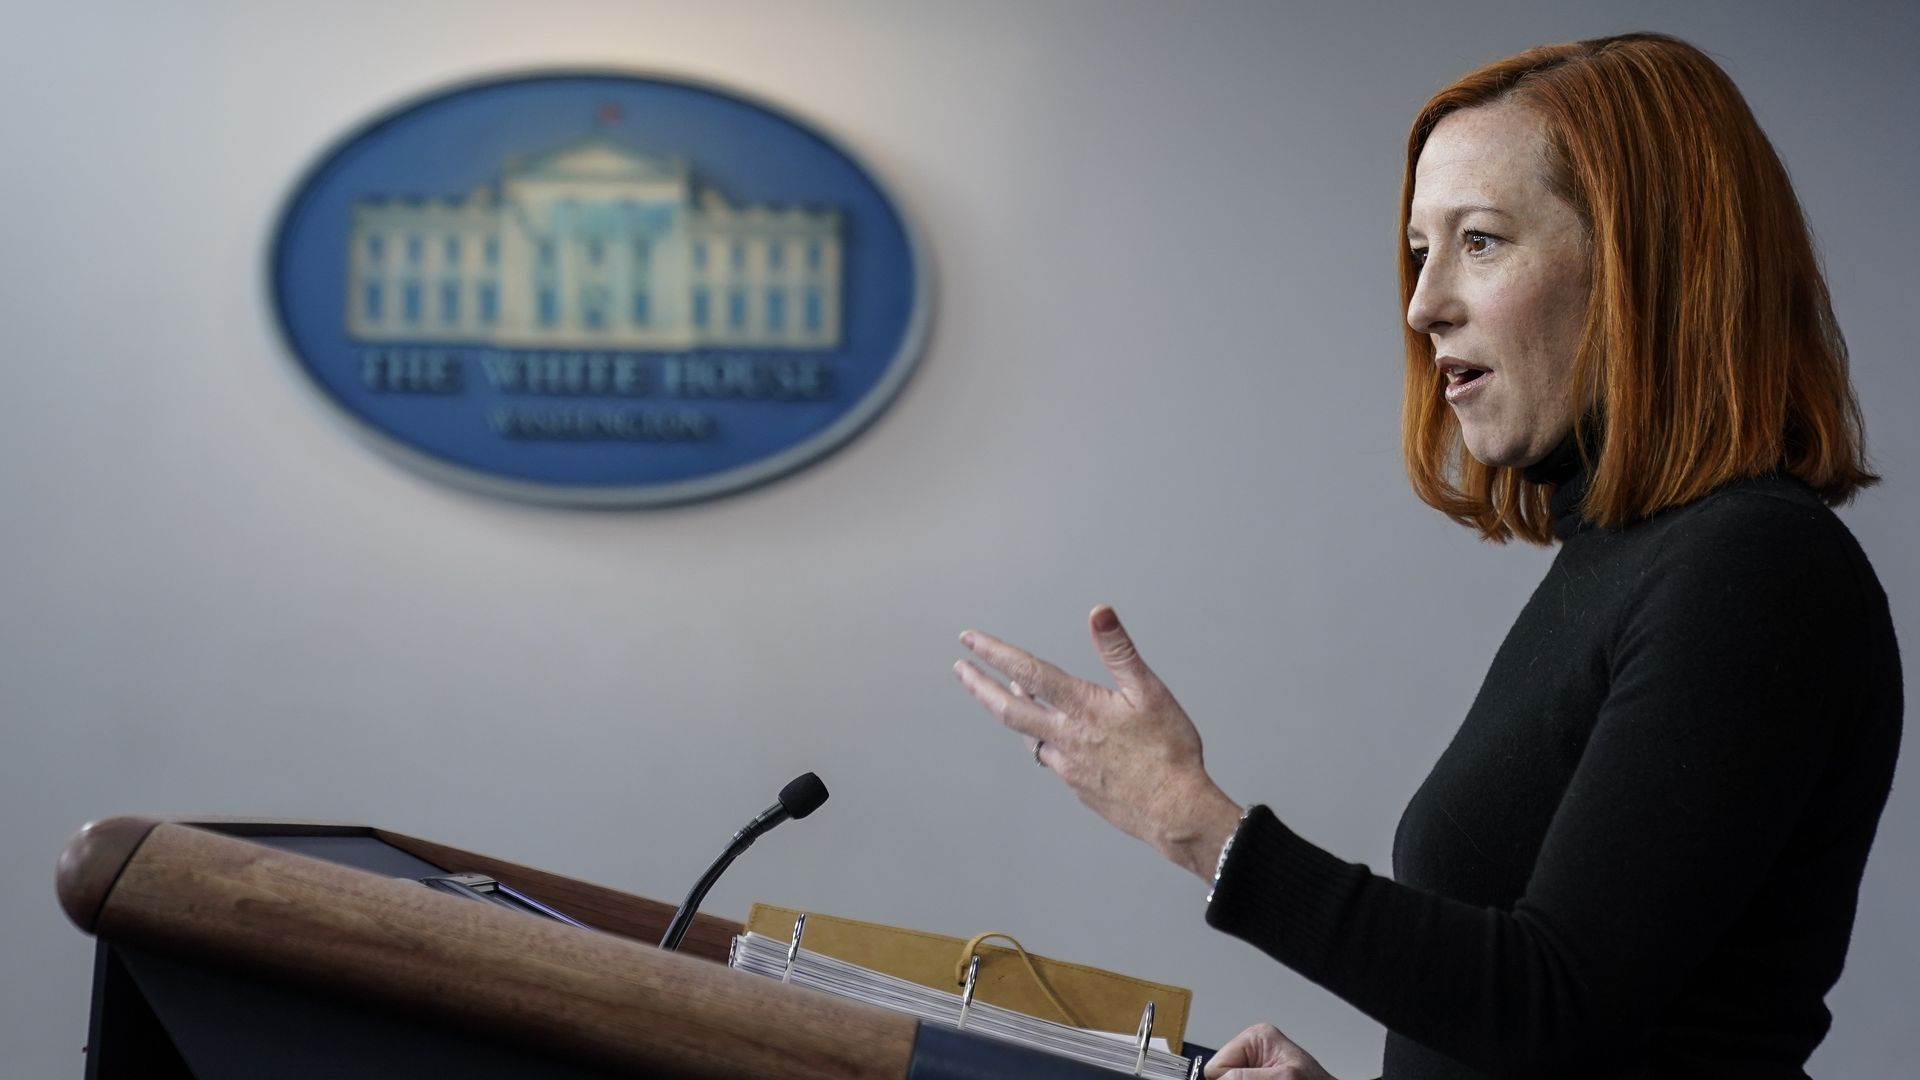 Jen Psaki stands at a podium with the White House logo in the background